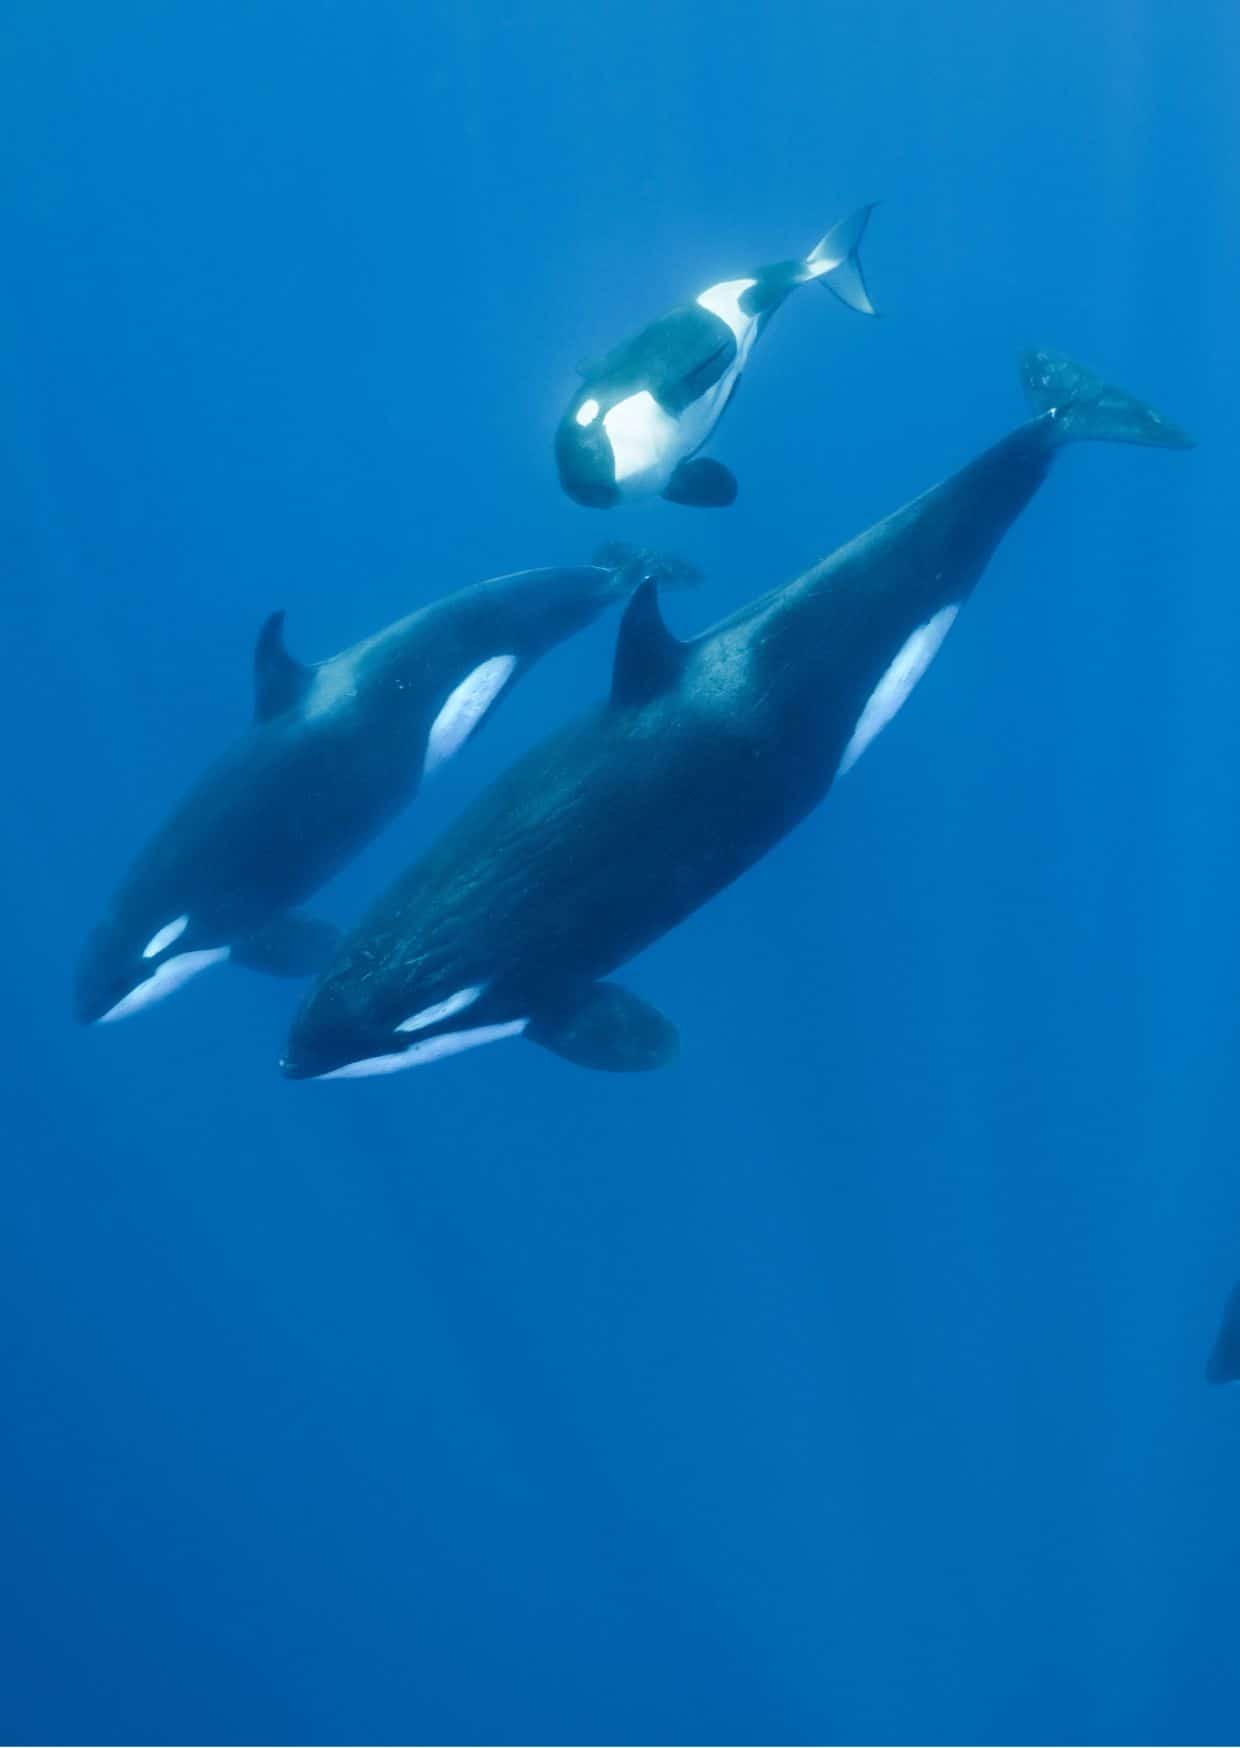 Orca whales under water